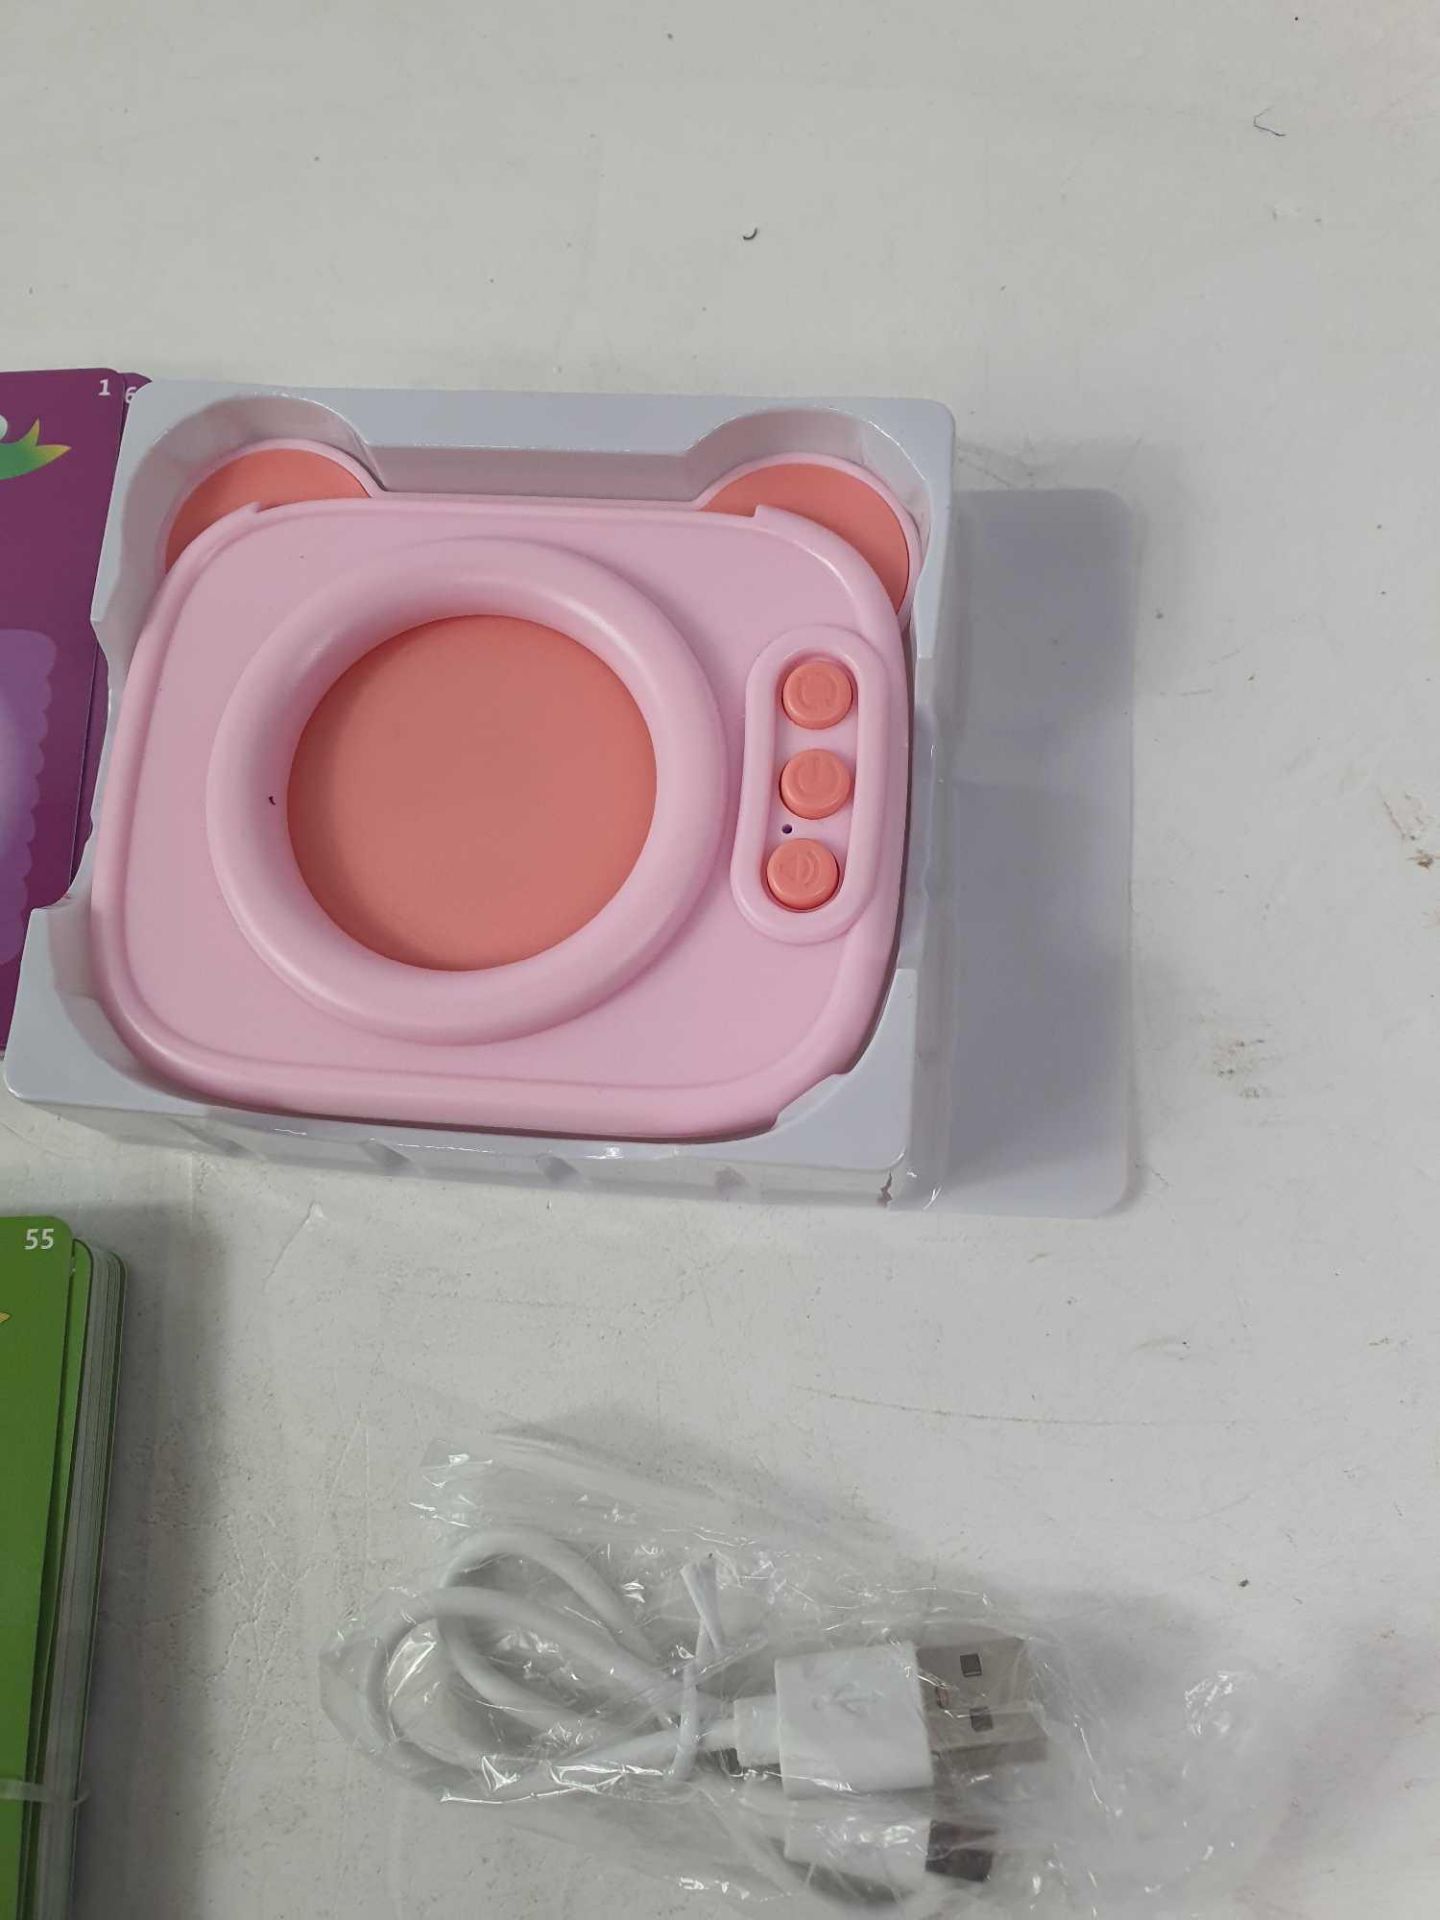 PRESCHOOL LEARNING DEVICE WITH CARDS AND CARD READER - Image 3 of 3